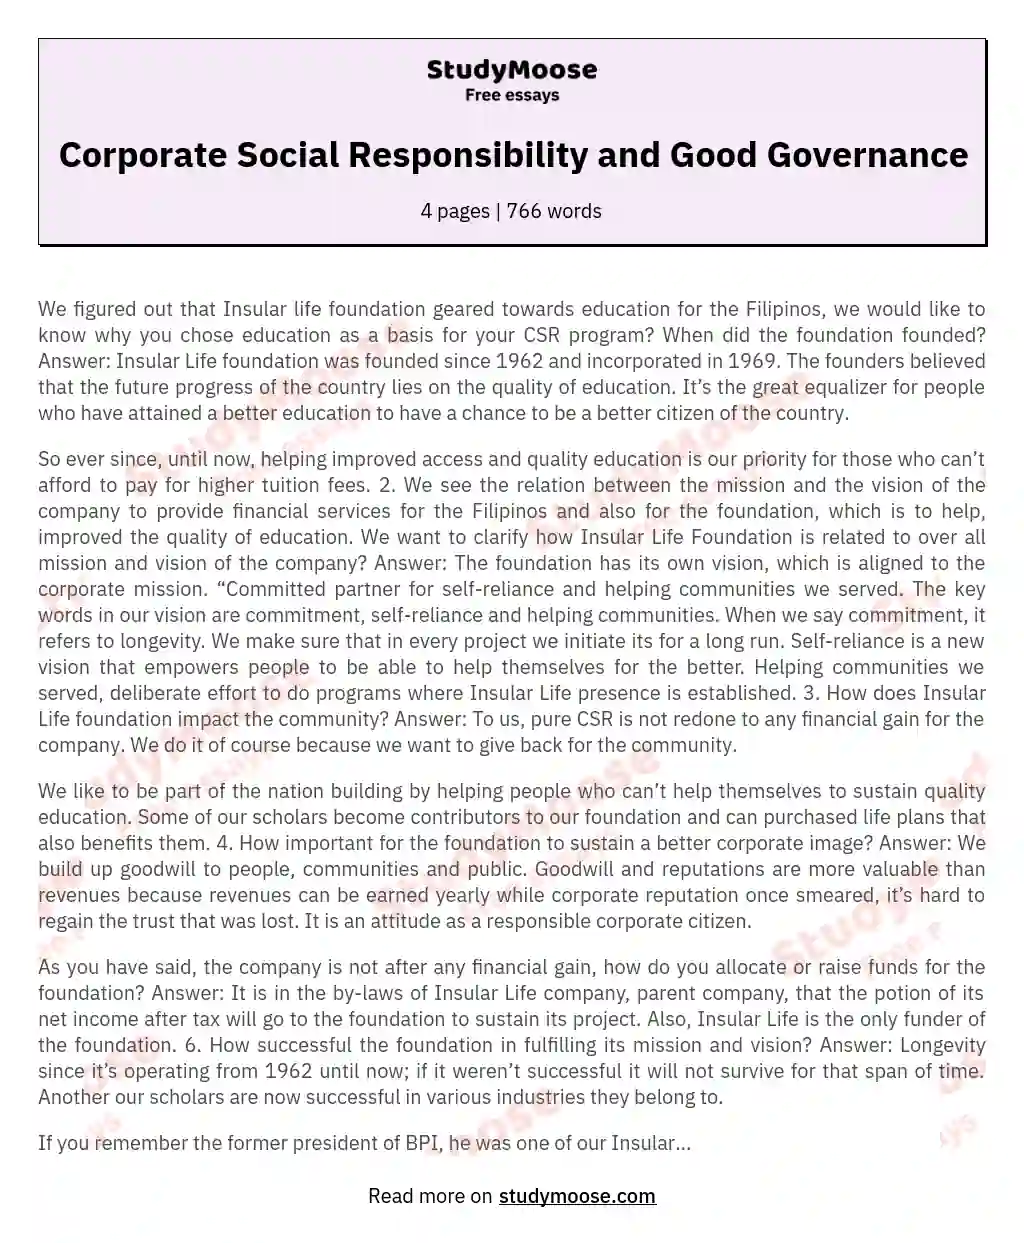 Corporate Social Responsibility and Good Governance essay